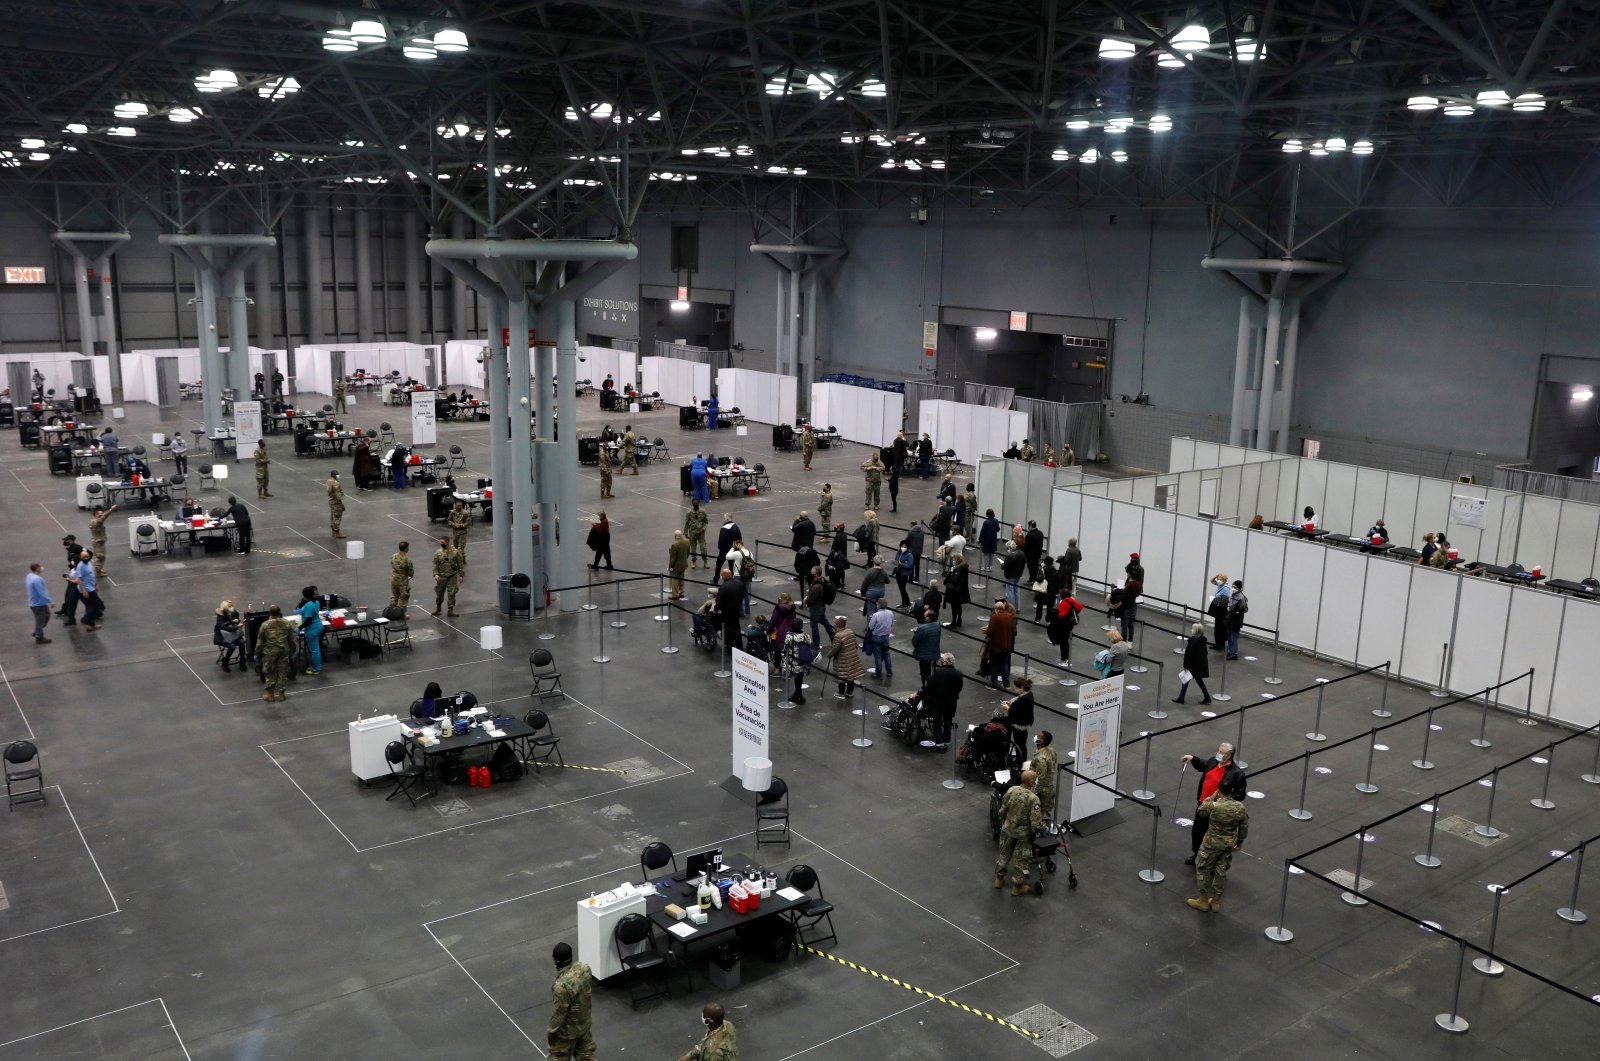 People line up as health care workers and military personnel work to distribute doses of the coronavirus disease (COVID-19) vaccine at the New York State COVID-19 vaccination site at the Jacob K. Javits Convention Center, in New York City, U.S., January 13, 2021. (Reuters Photo)